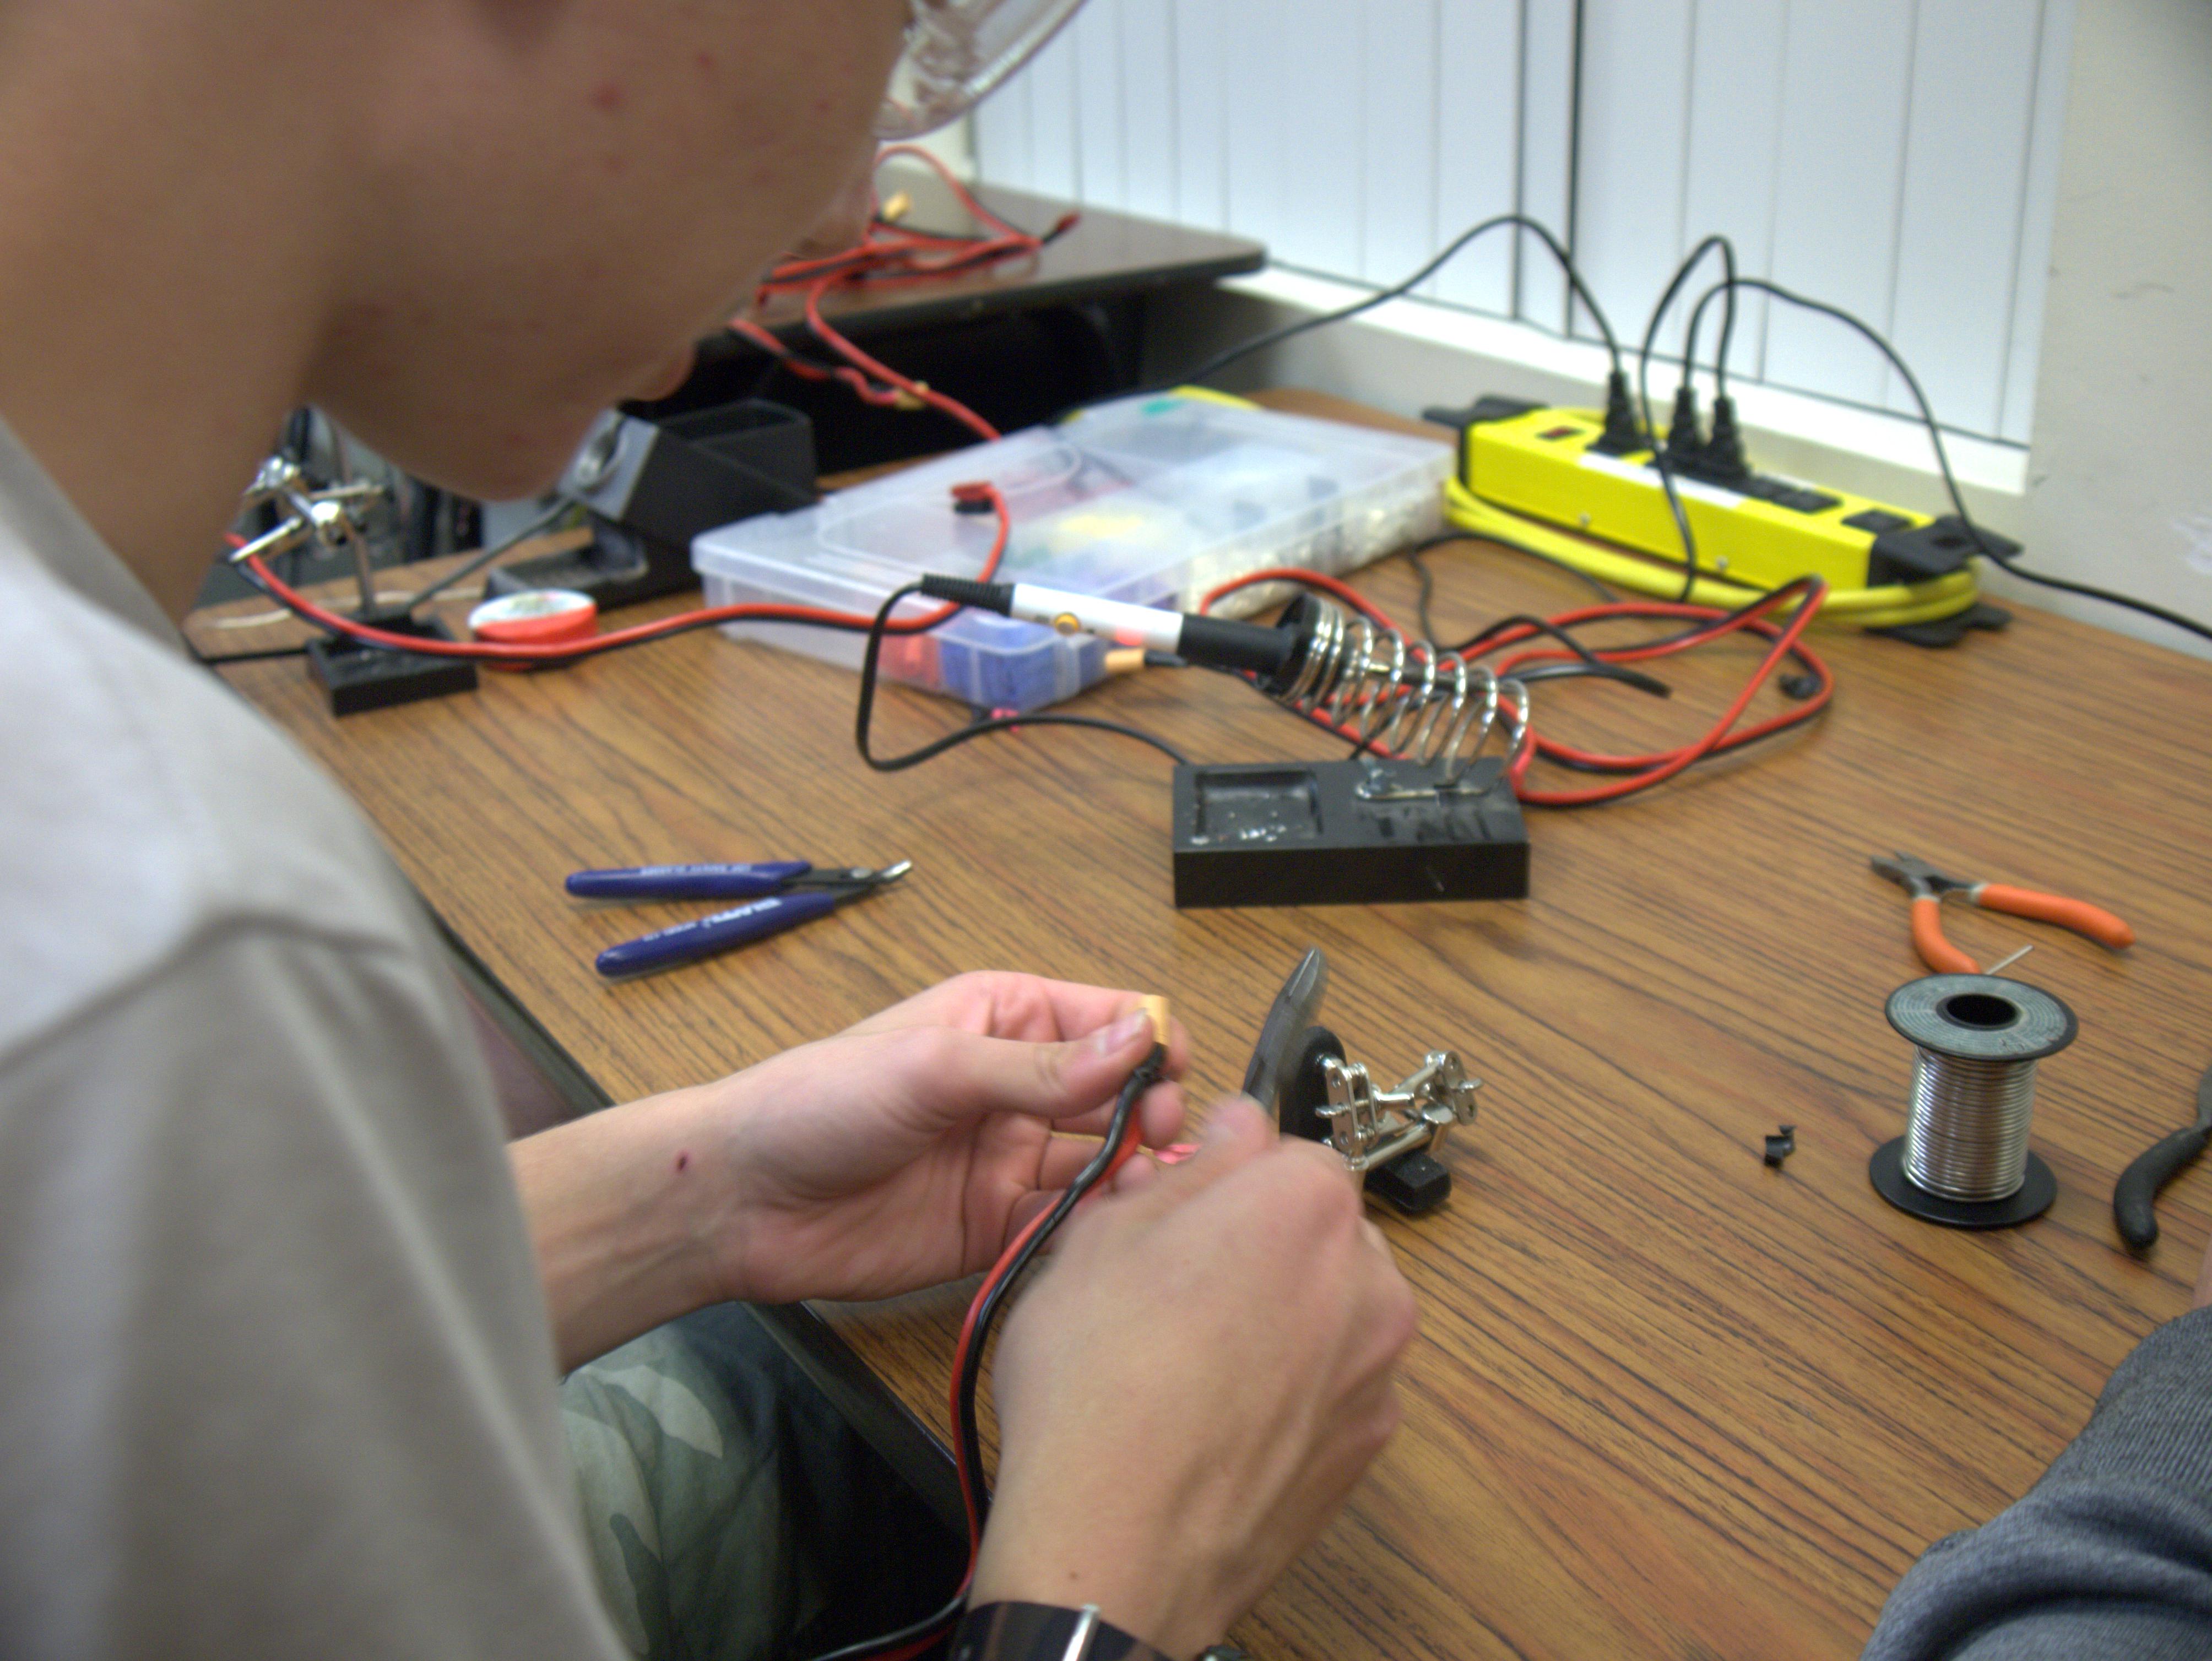 Learning to solder